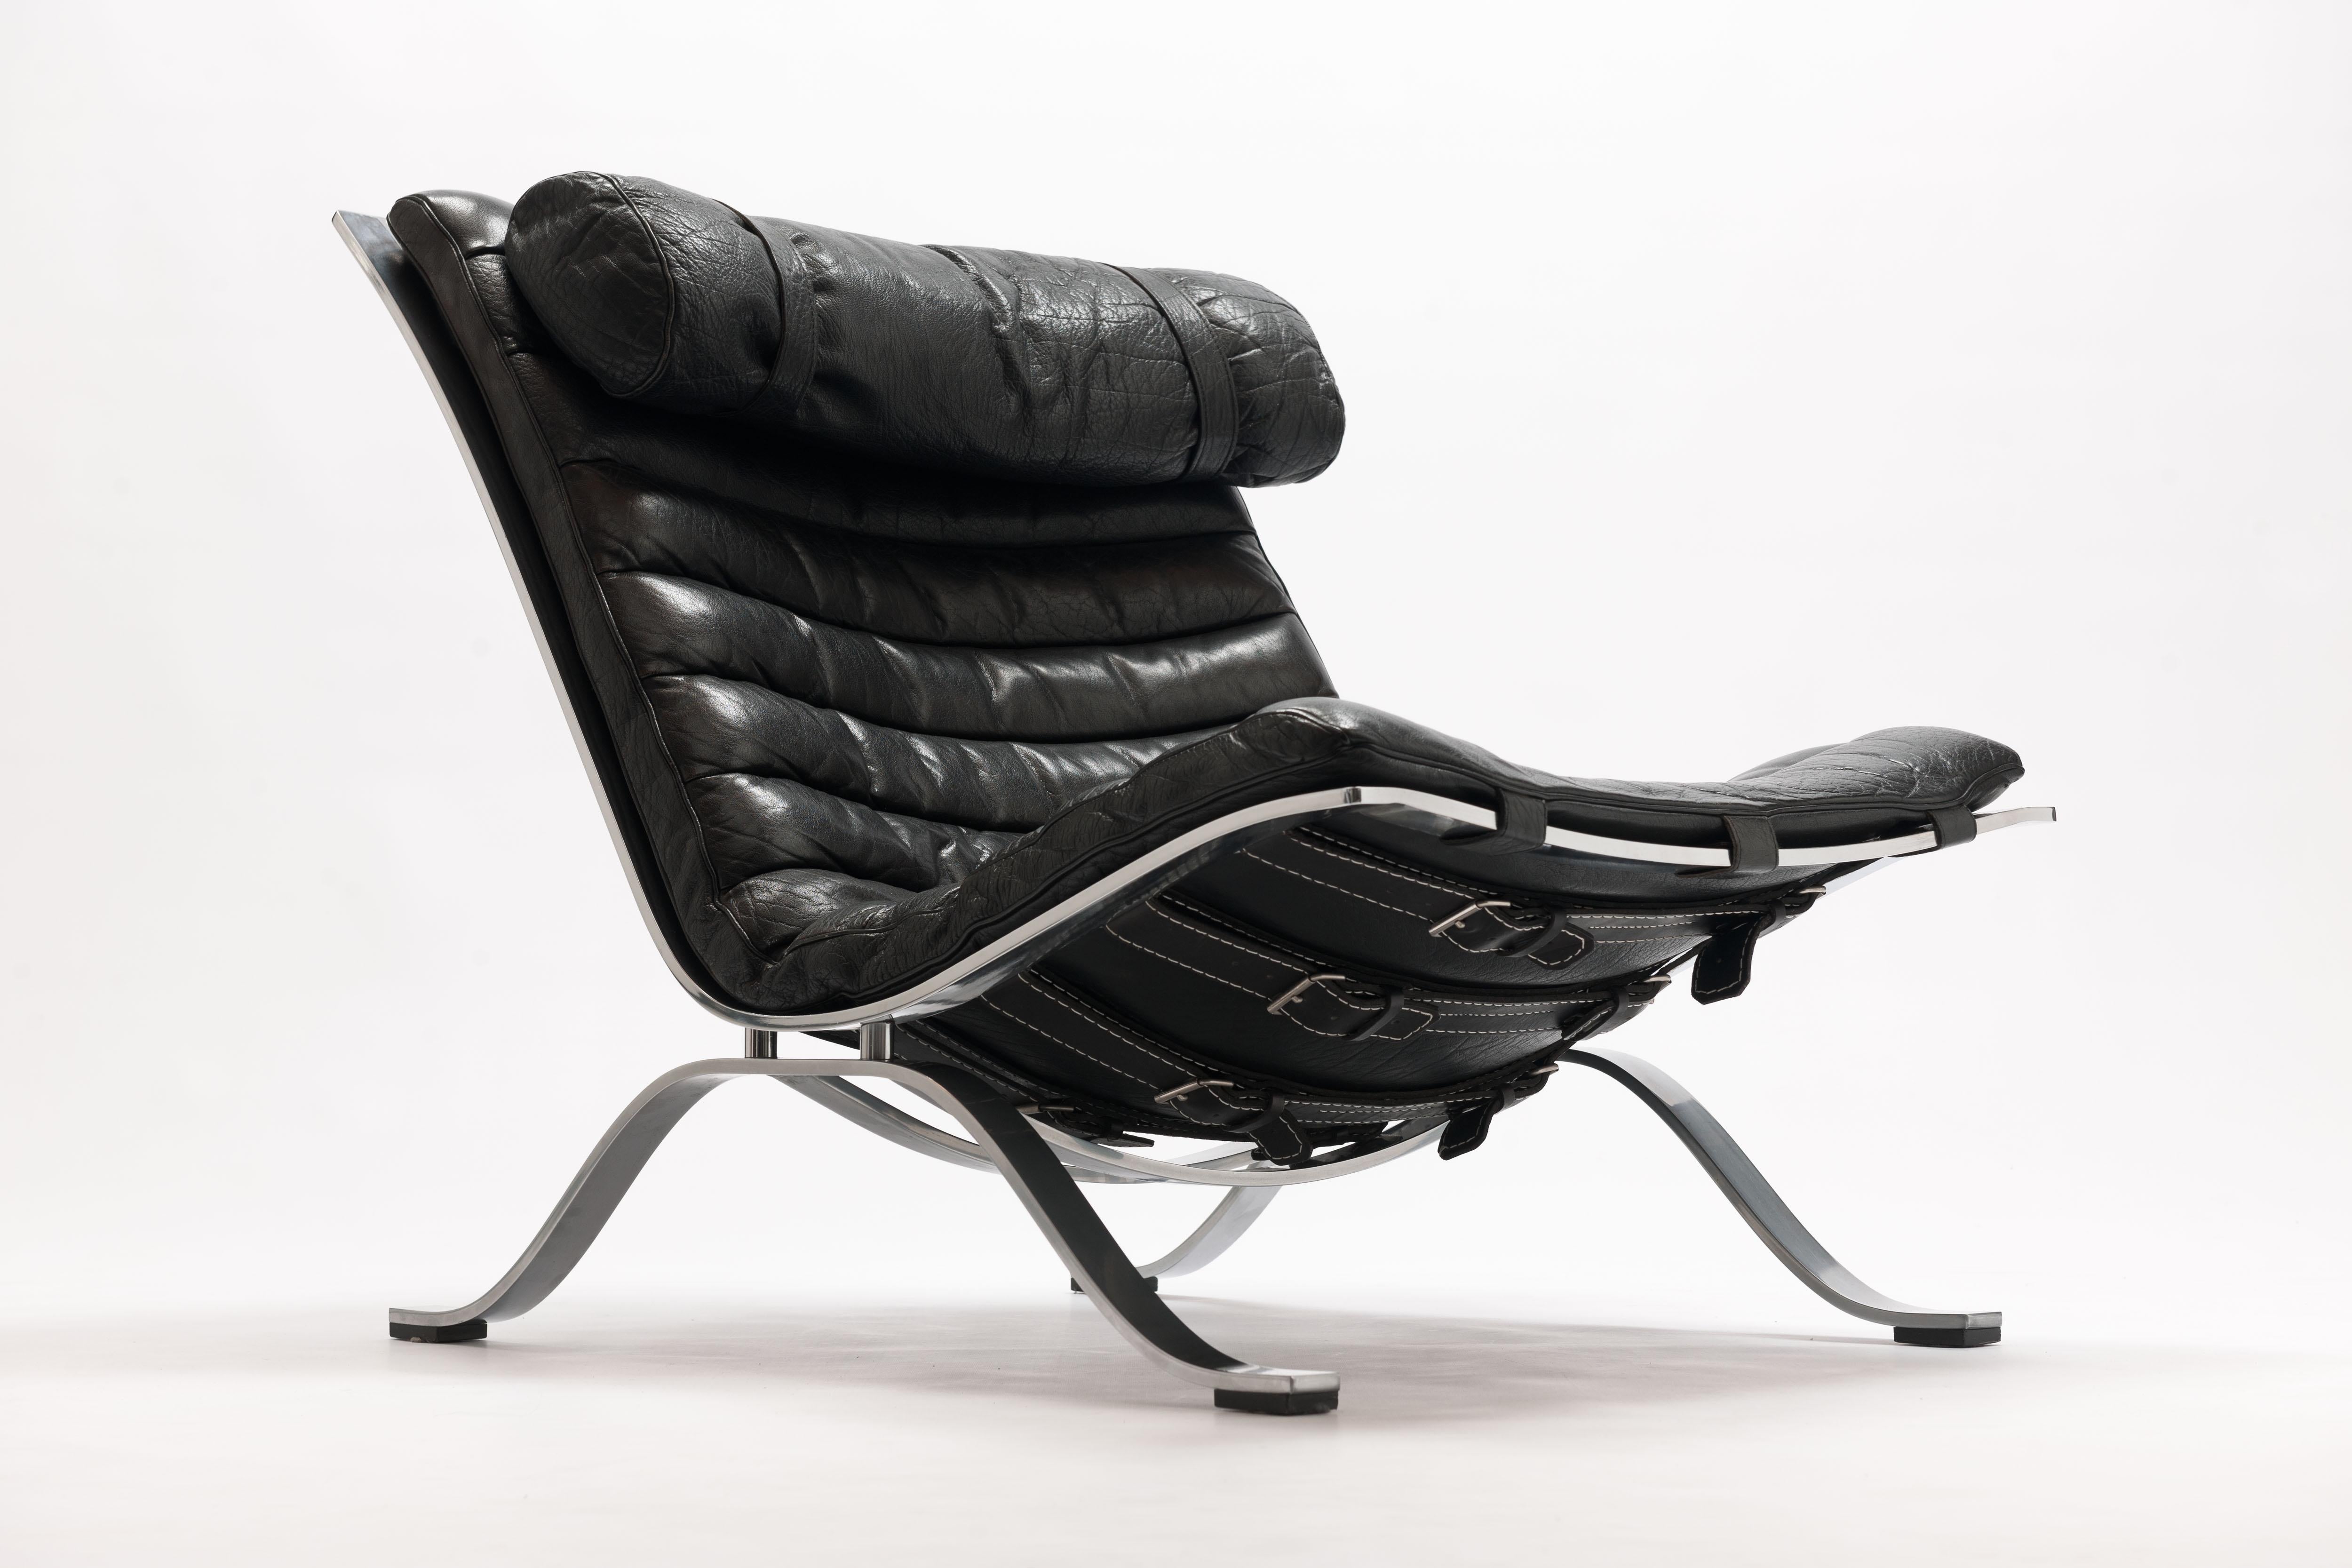  Ari Lounge Chair by Arne Norell - Pair (2) Available  2